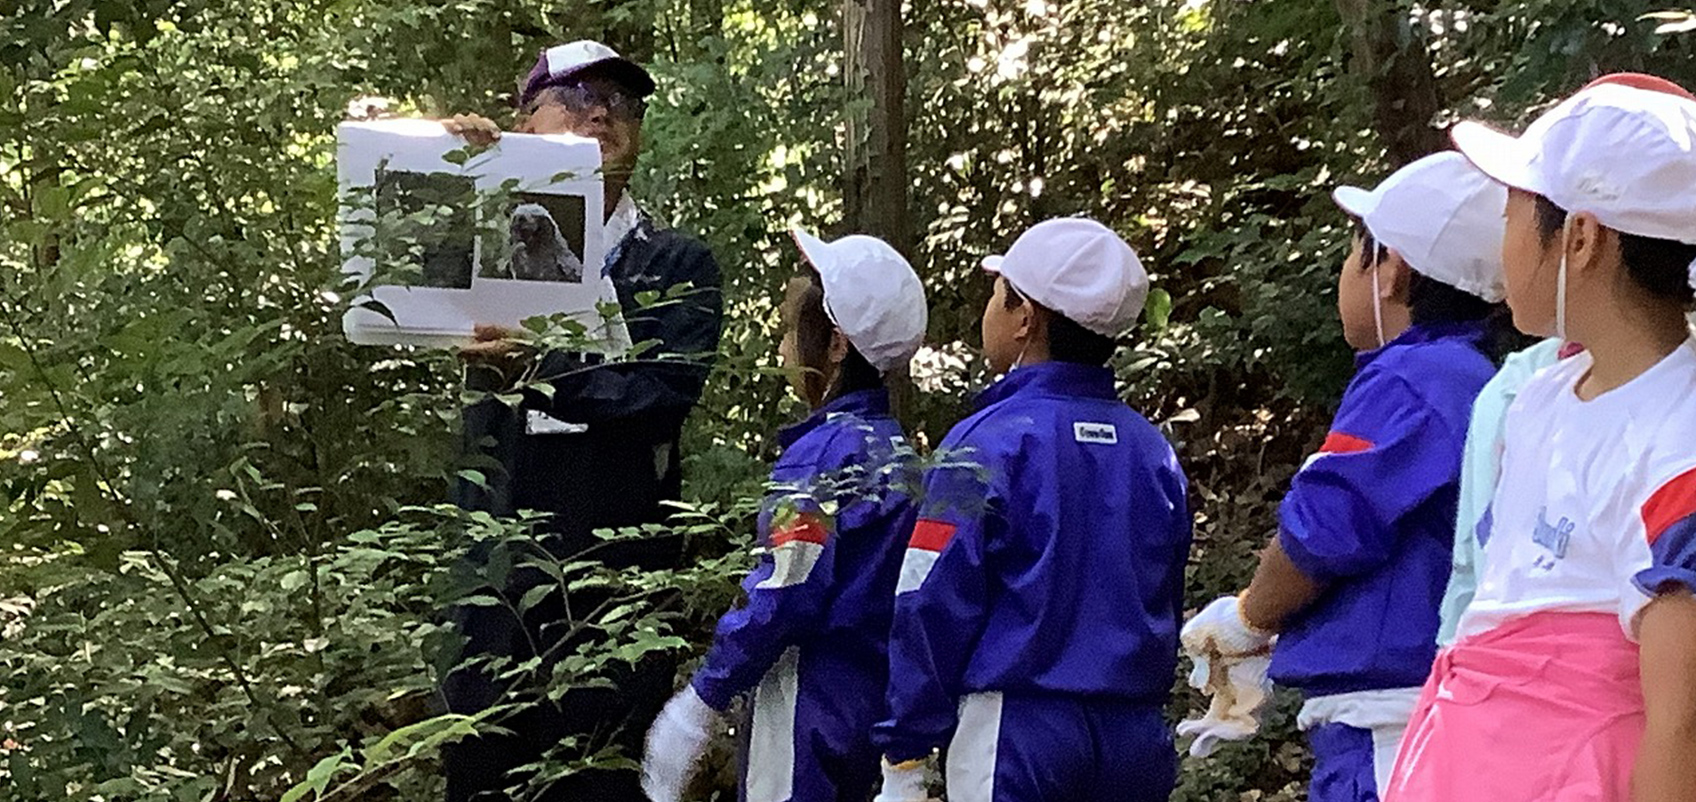 Instructor explaing to children in the forest using a panel